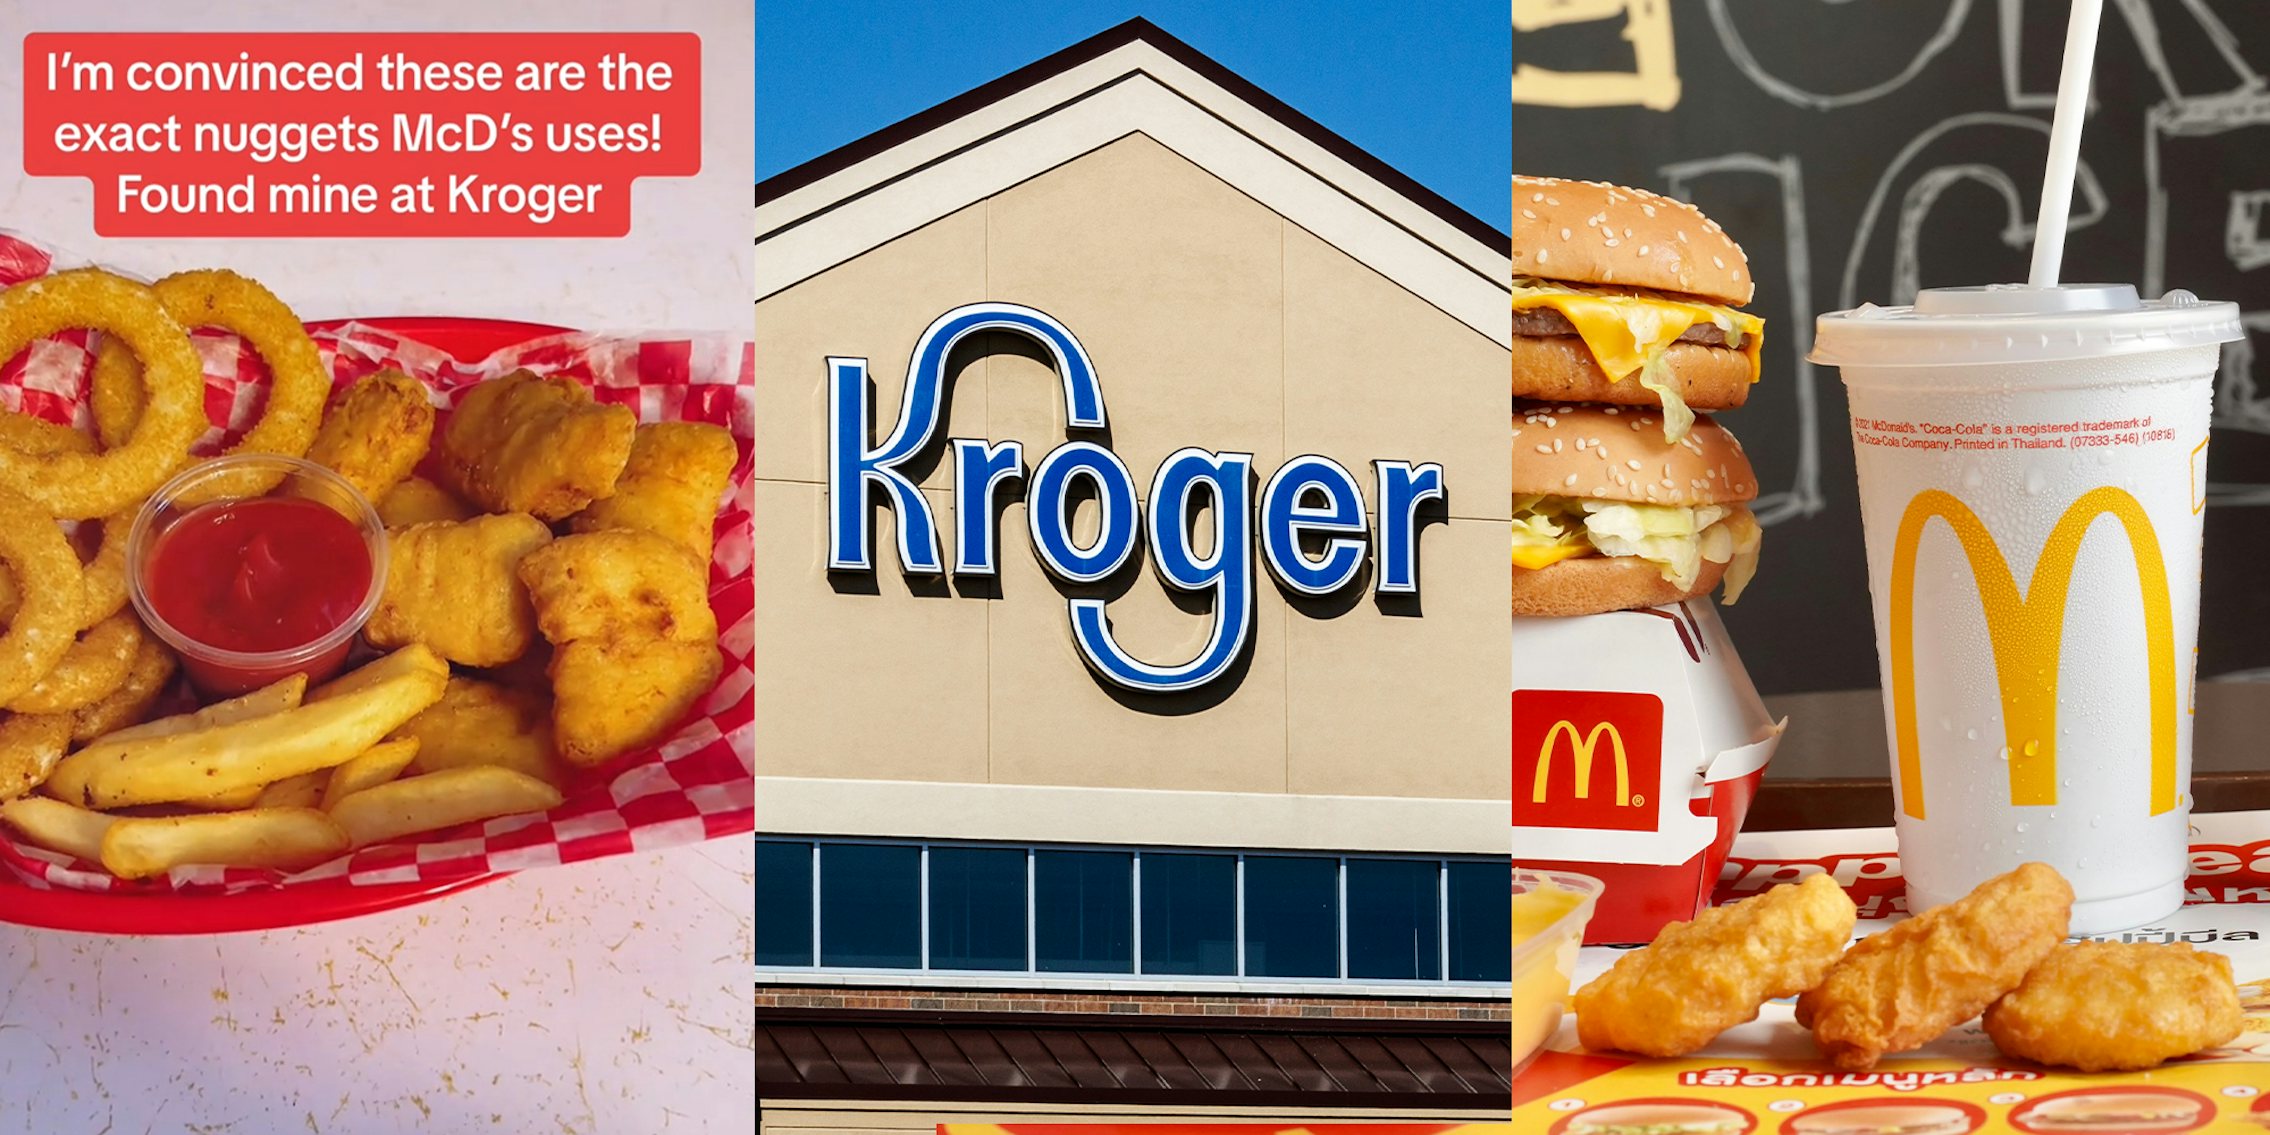 Customer buys Kroger nuggets and compares them to McDonald's Chicken McNuggets